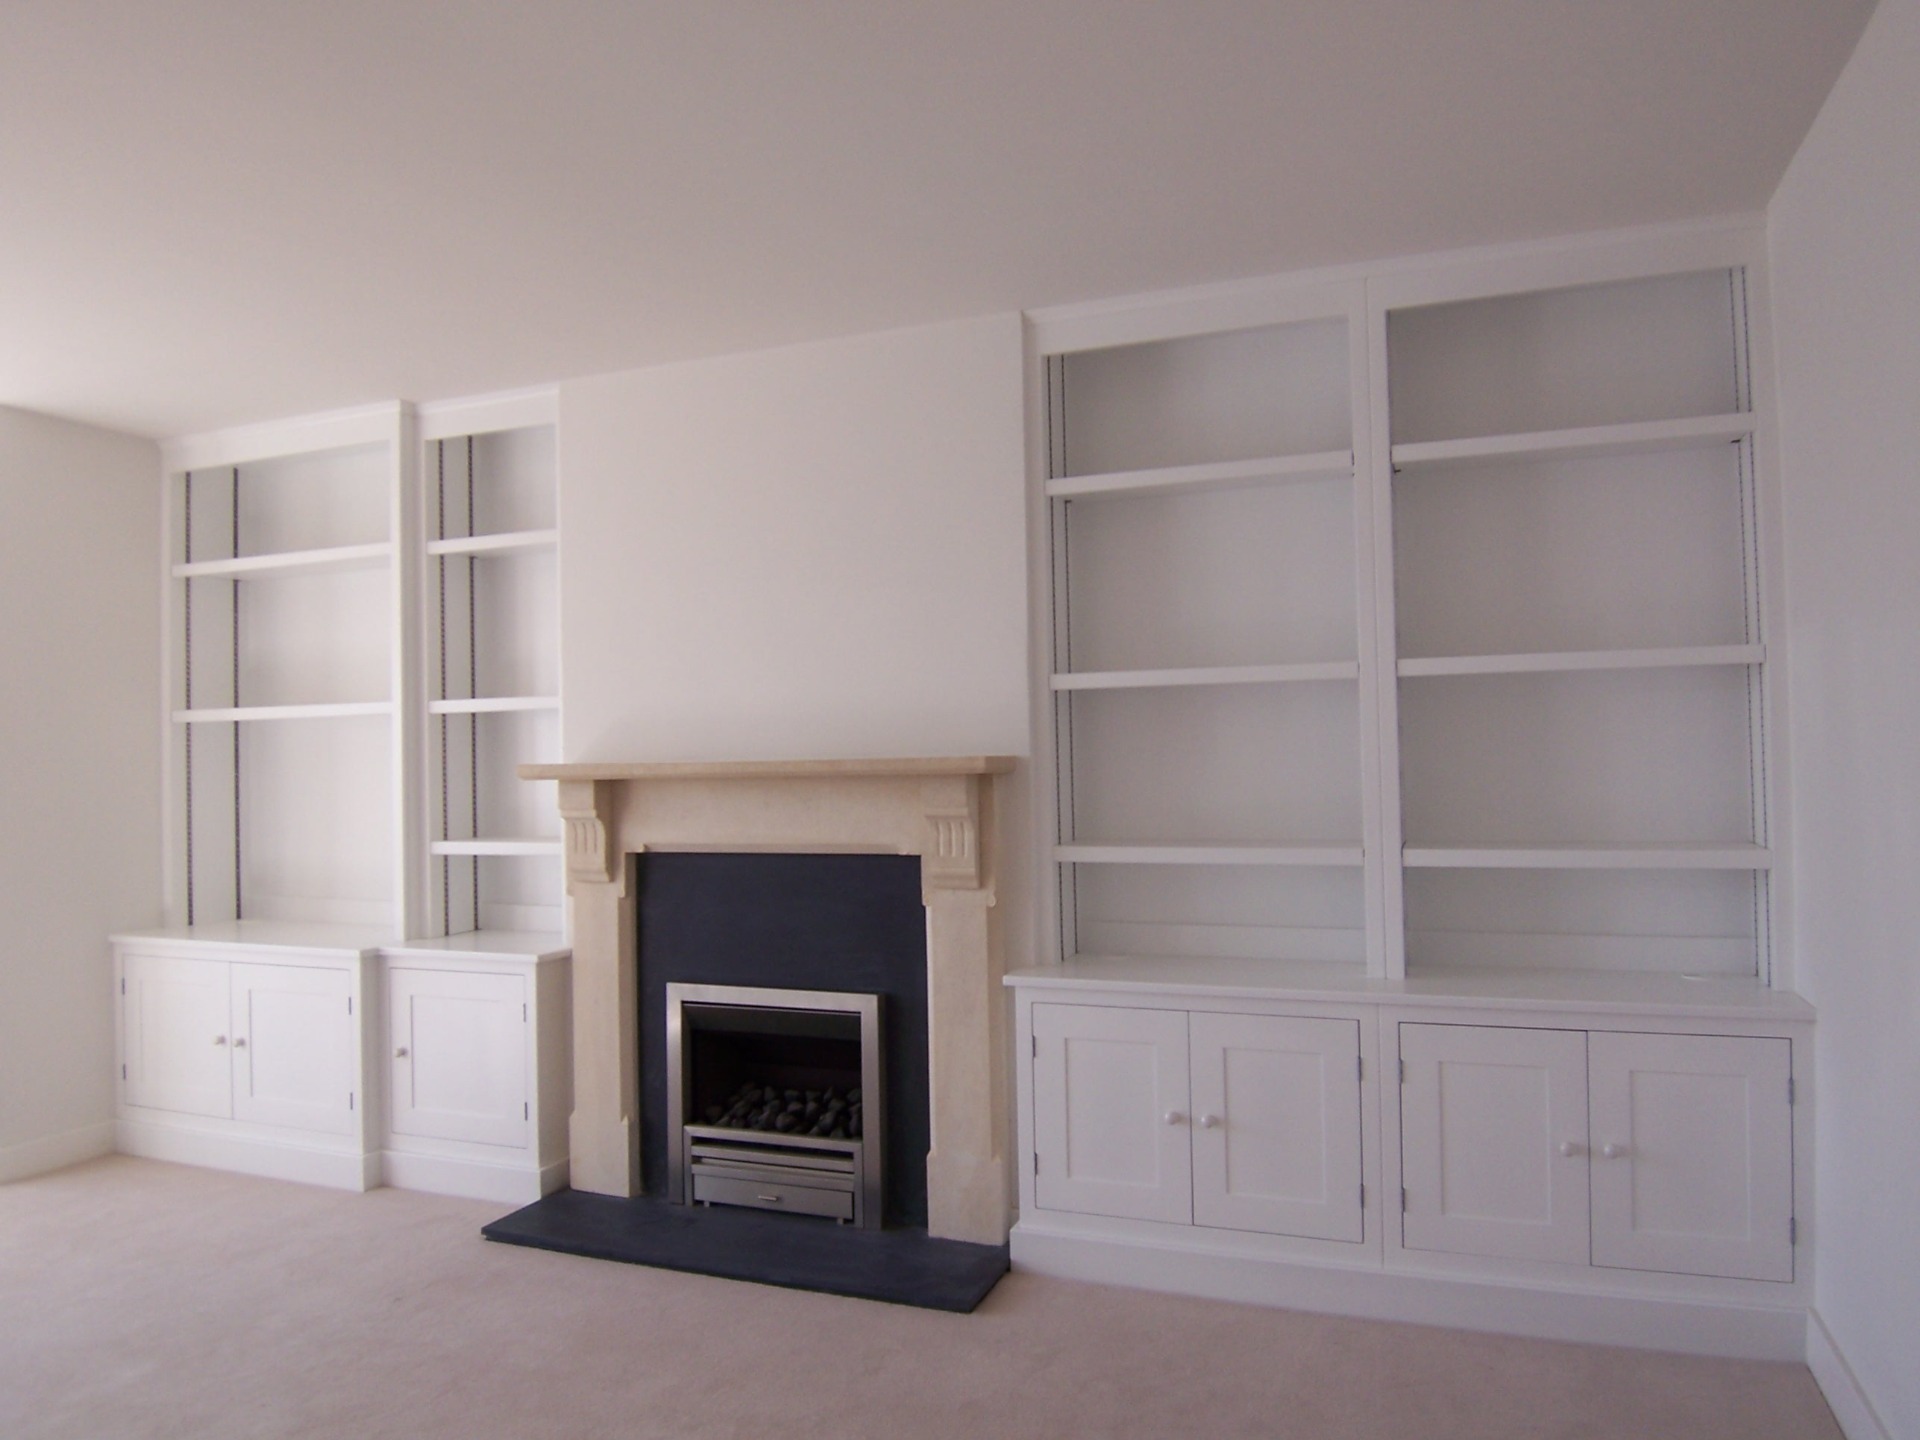 Bespoke living space, Oxford